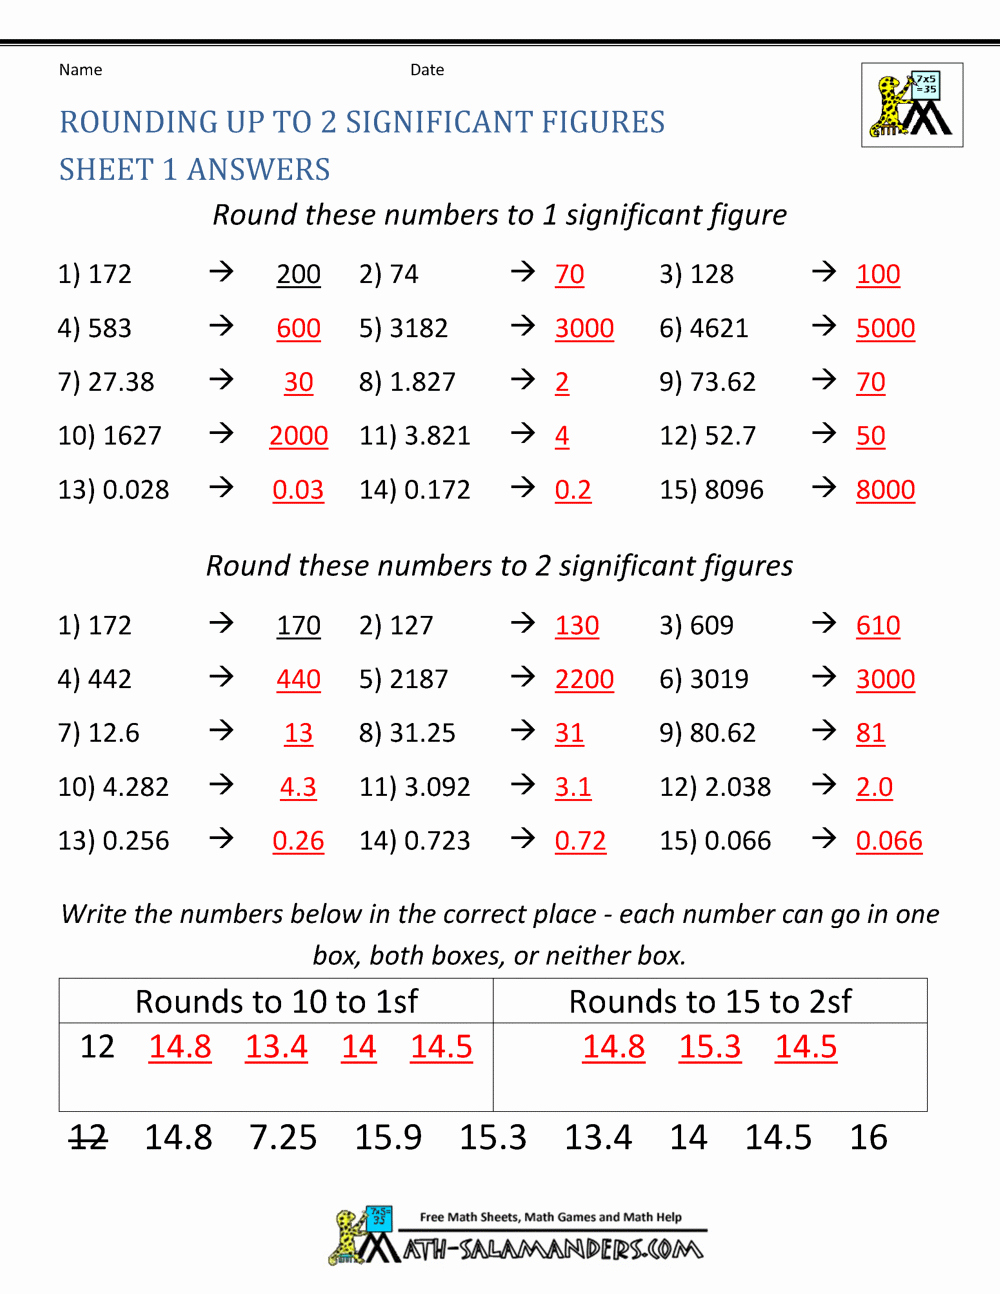 Significant Figures Worksheet Answers Awesome Rounding Significant Figures